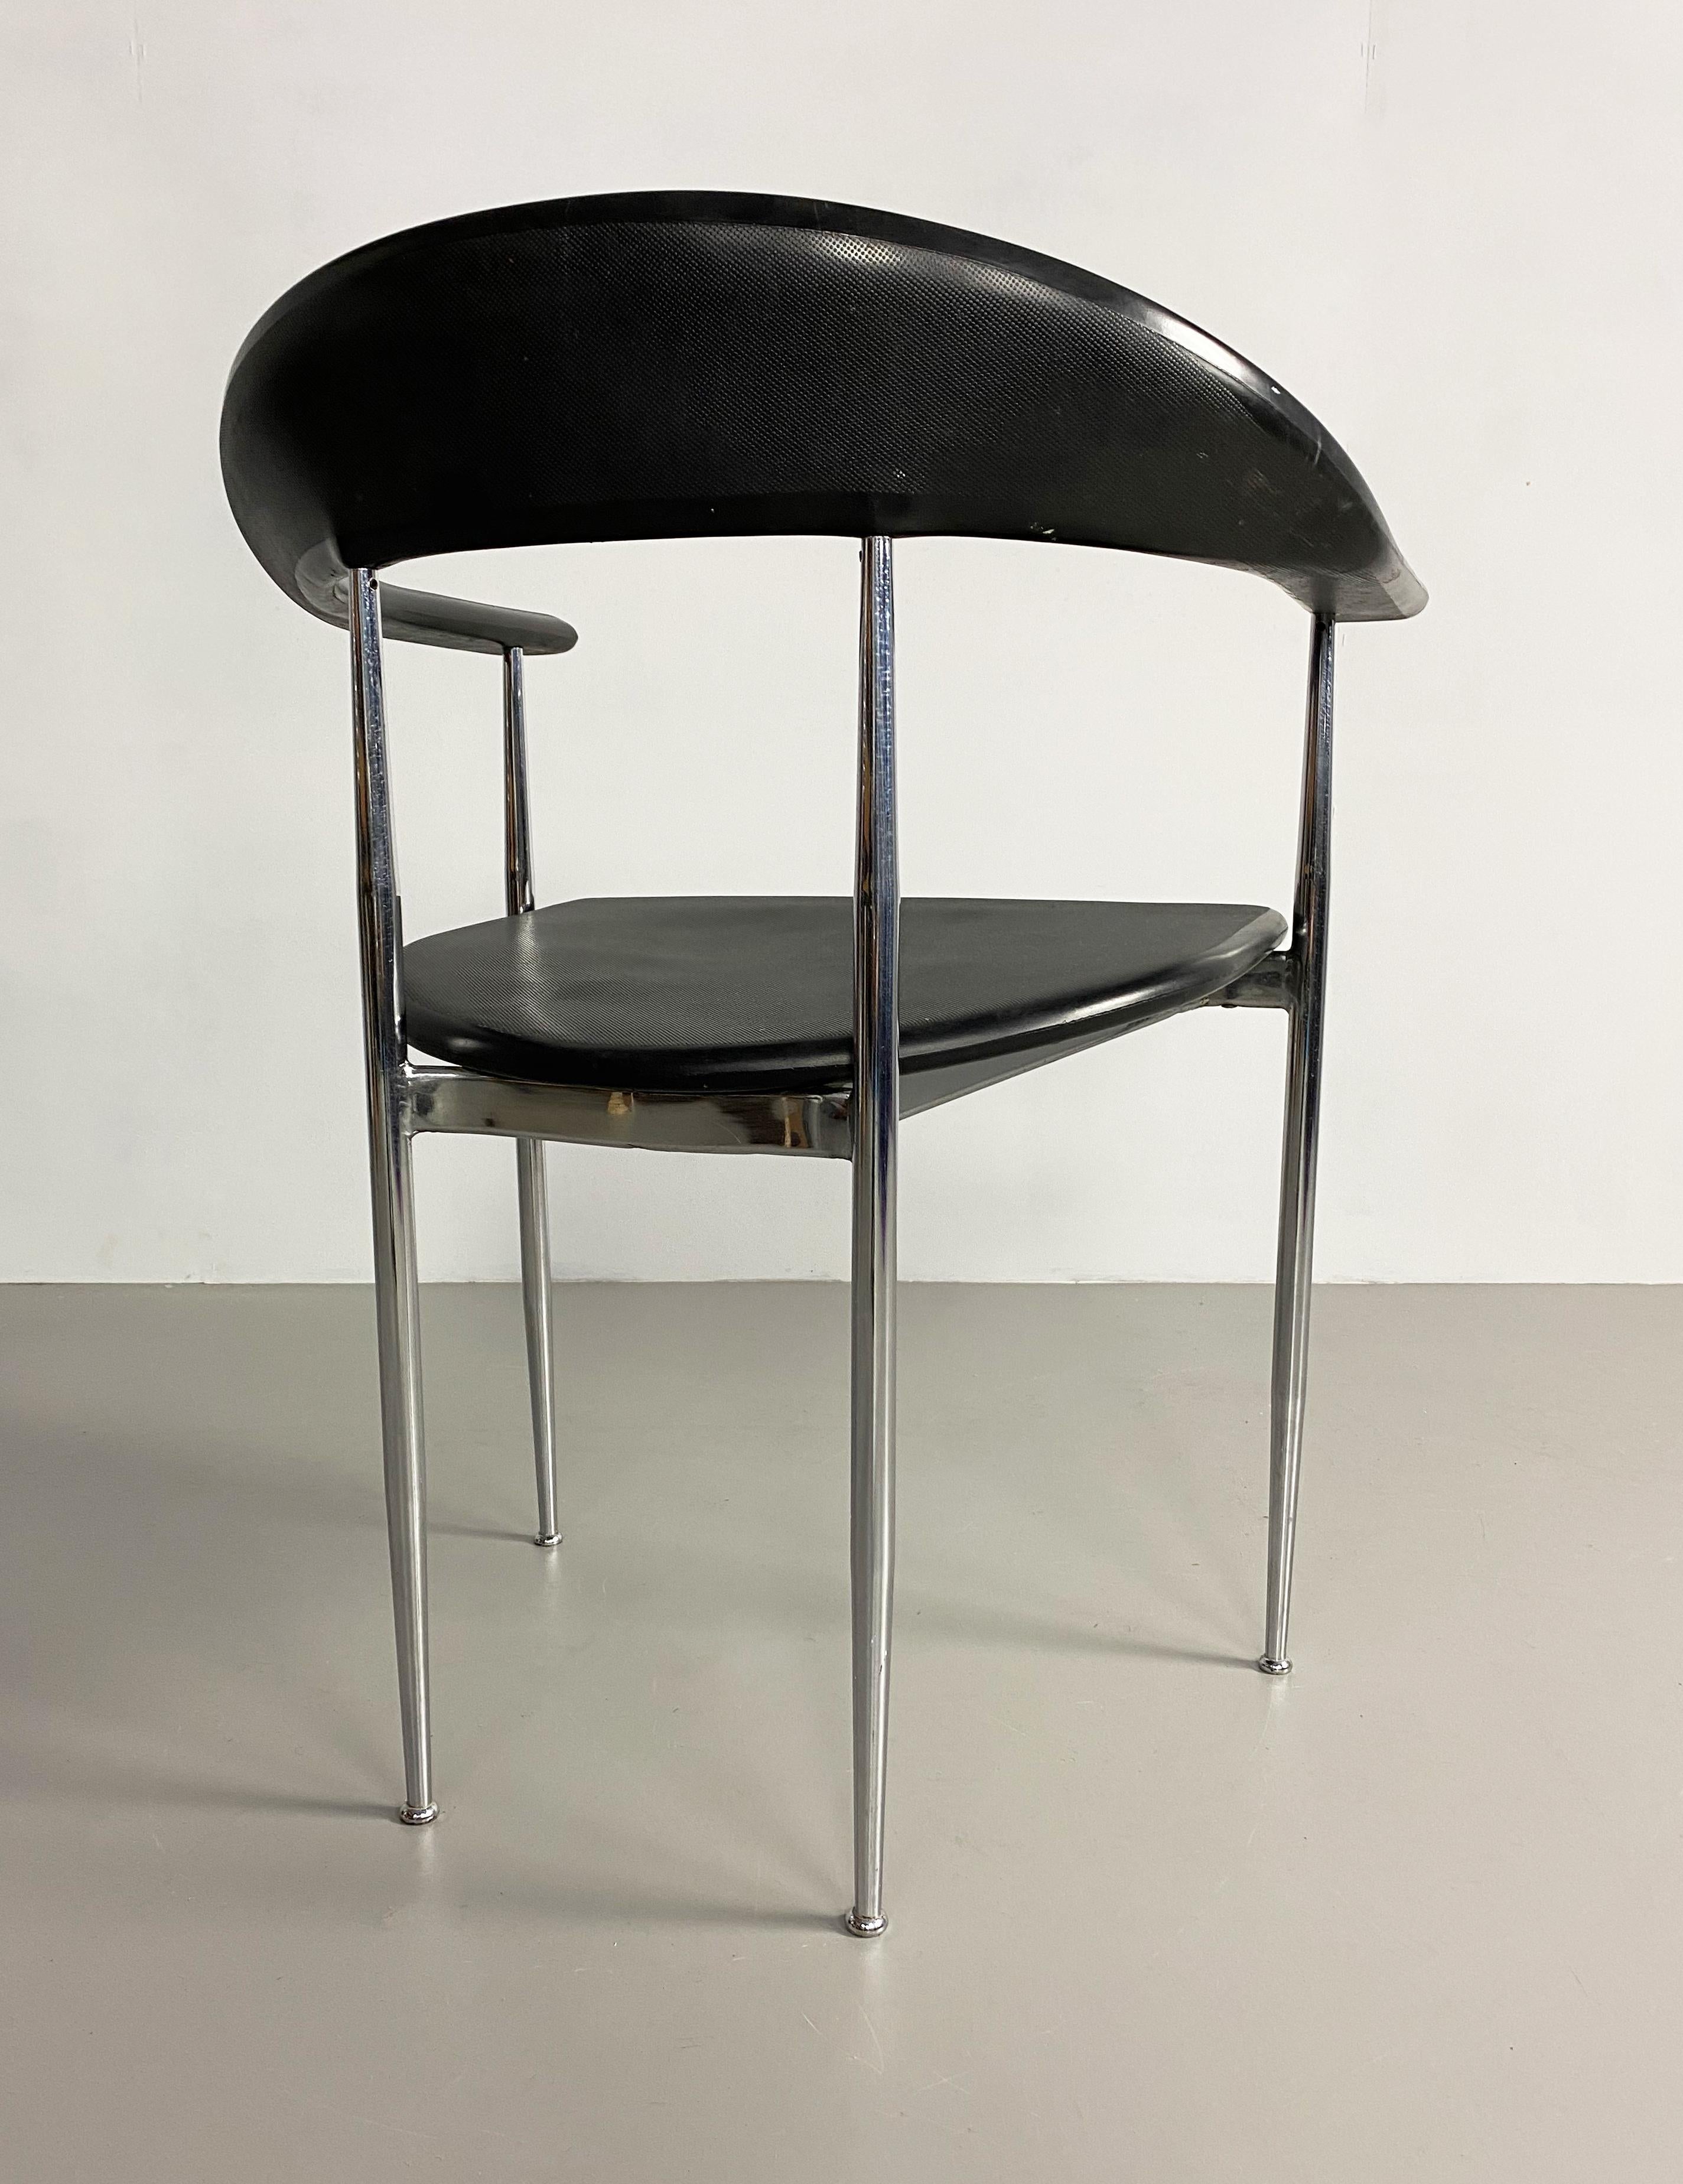 'P40' Dining Chair by Vegni & Gualtierotti for Fasem, Italy, c.1980 In Good Condition For Sale In Surbiton, GB